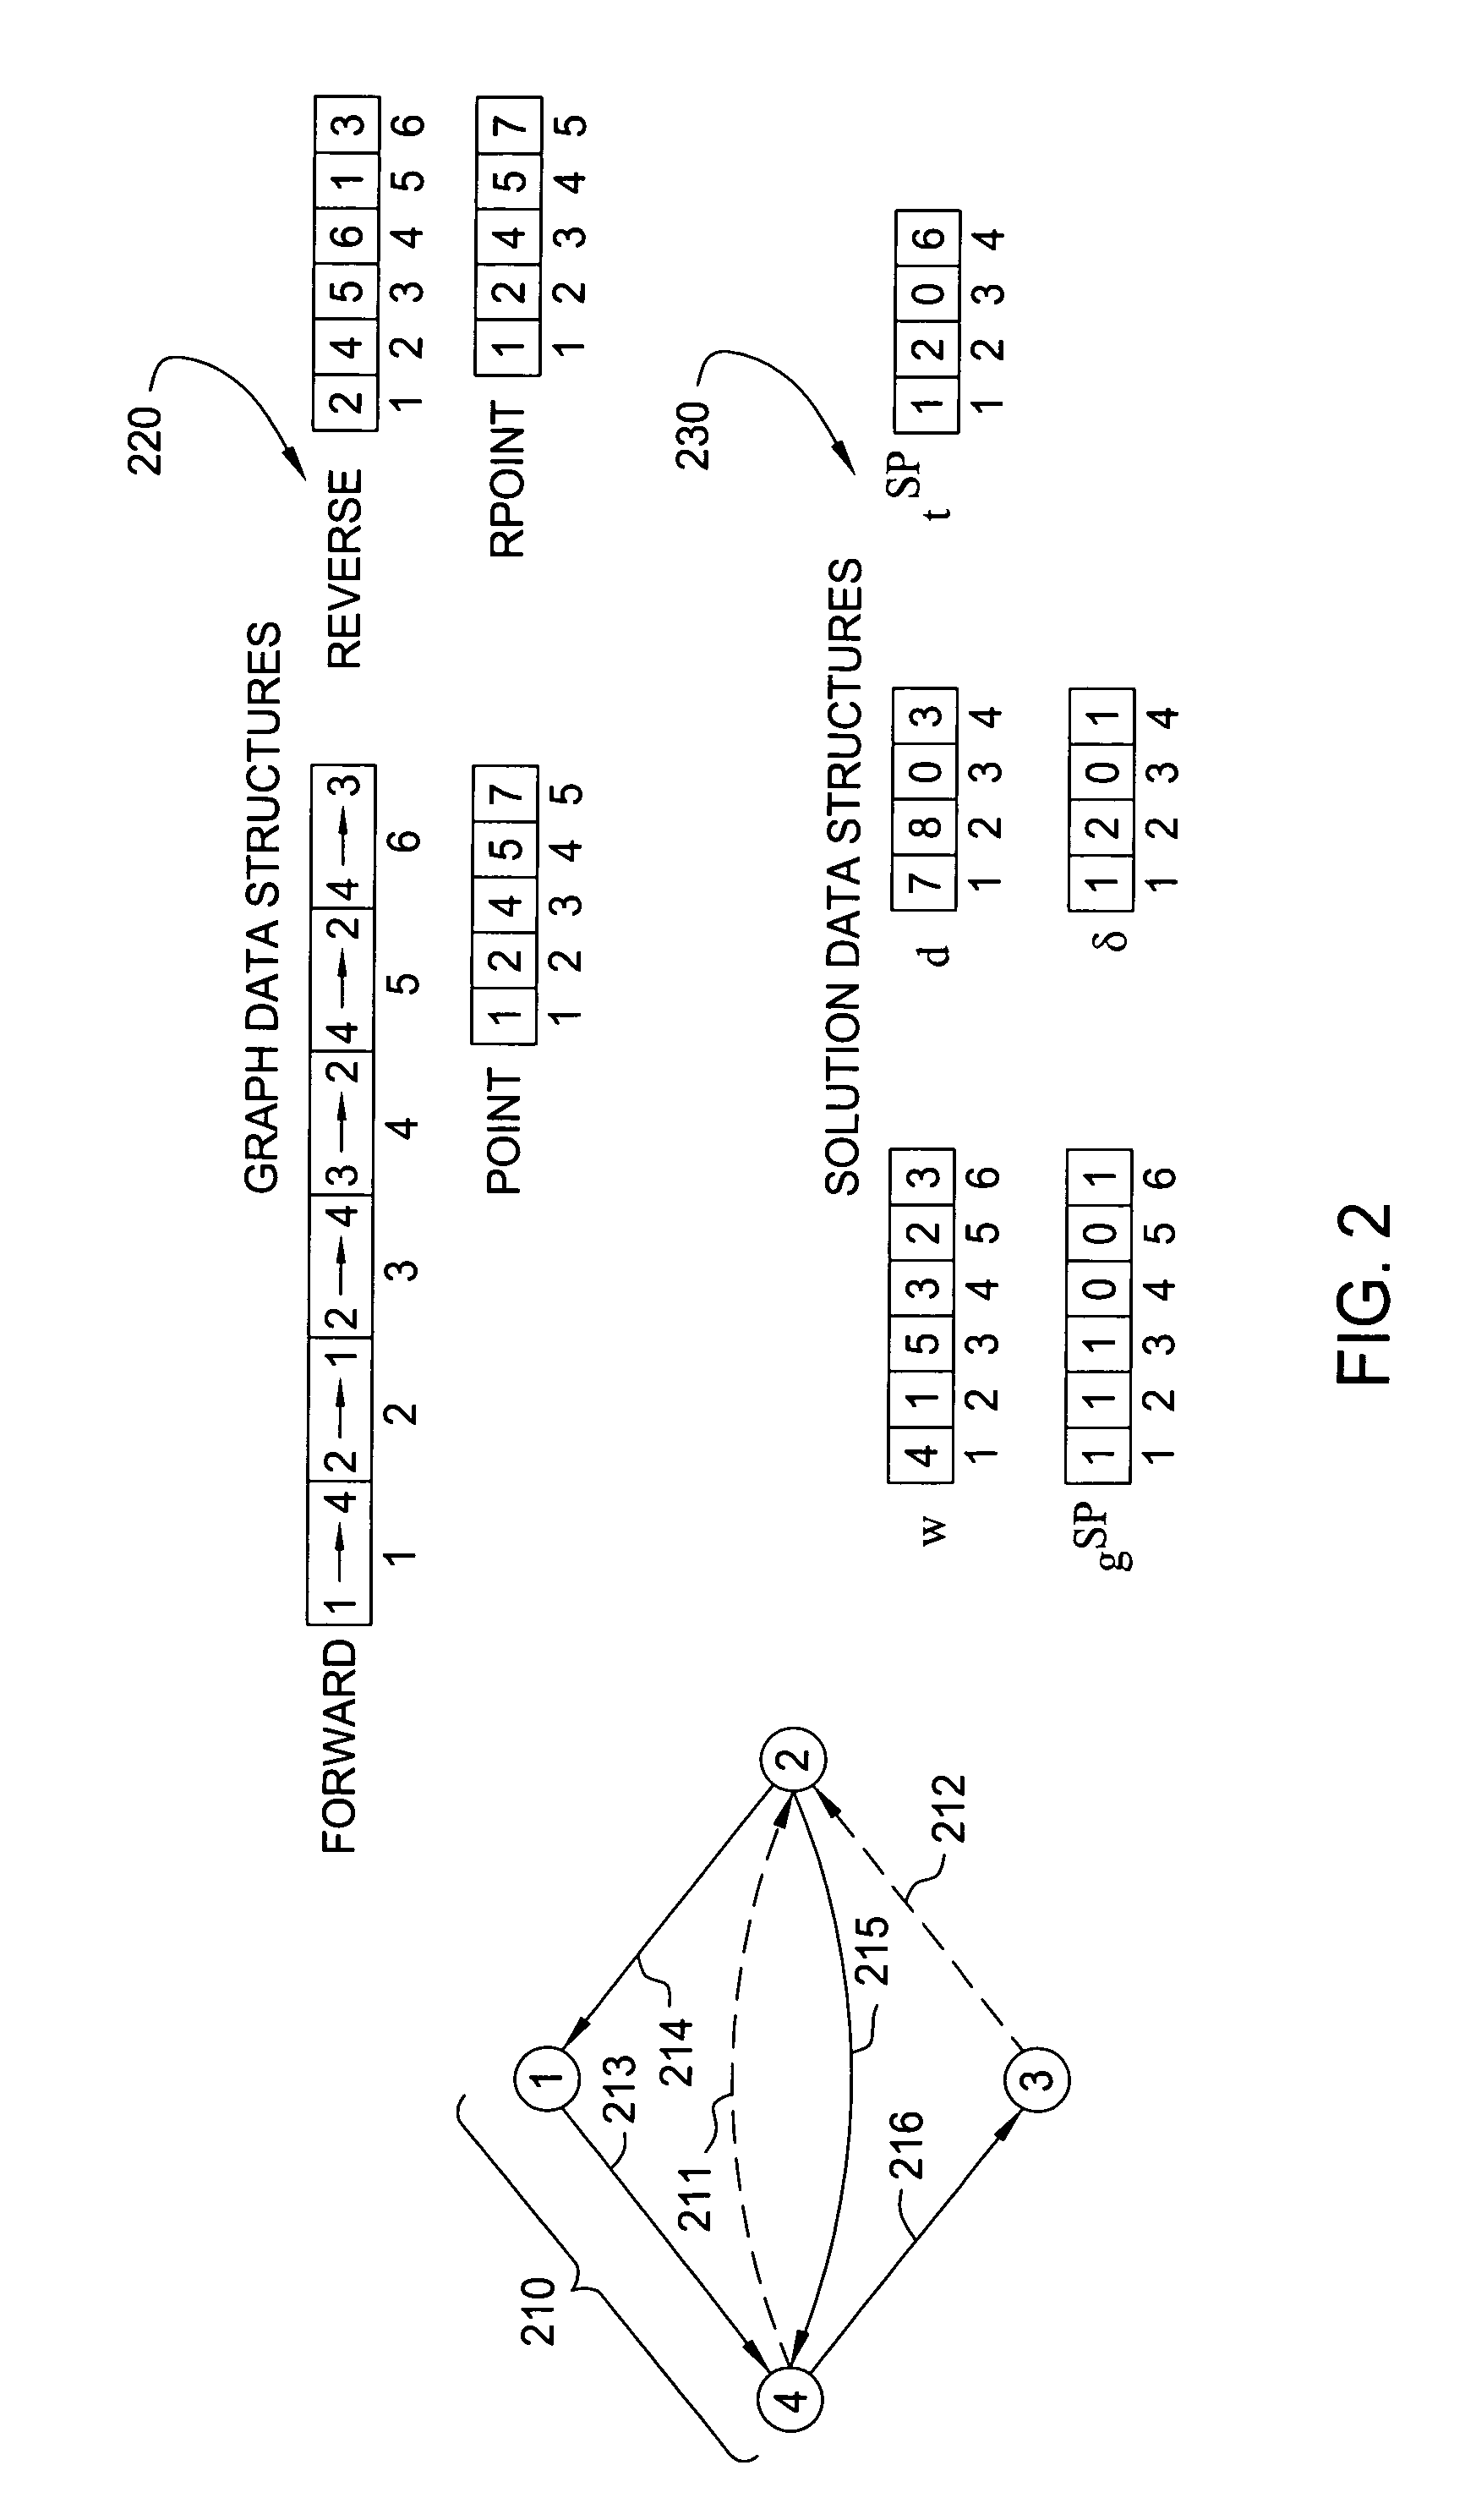 Method and apparatus for updating a shortest path graph